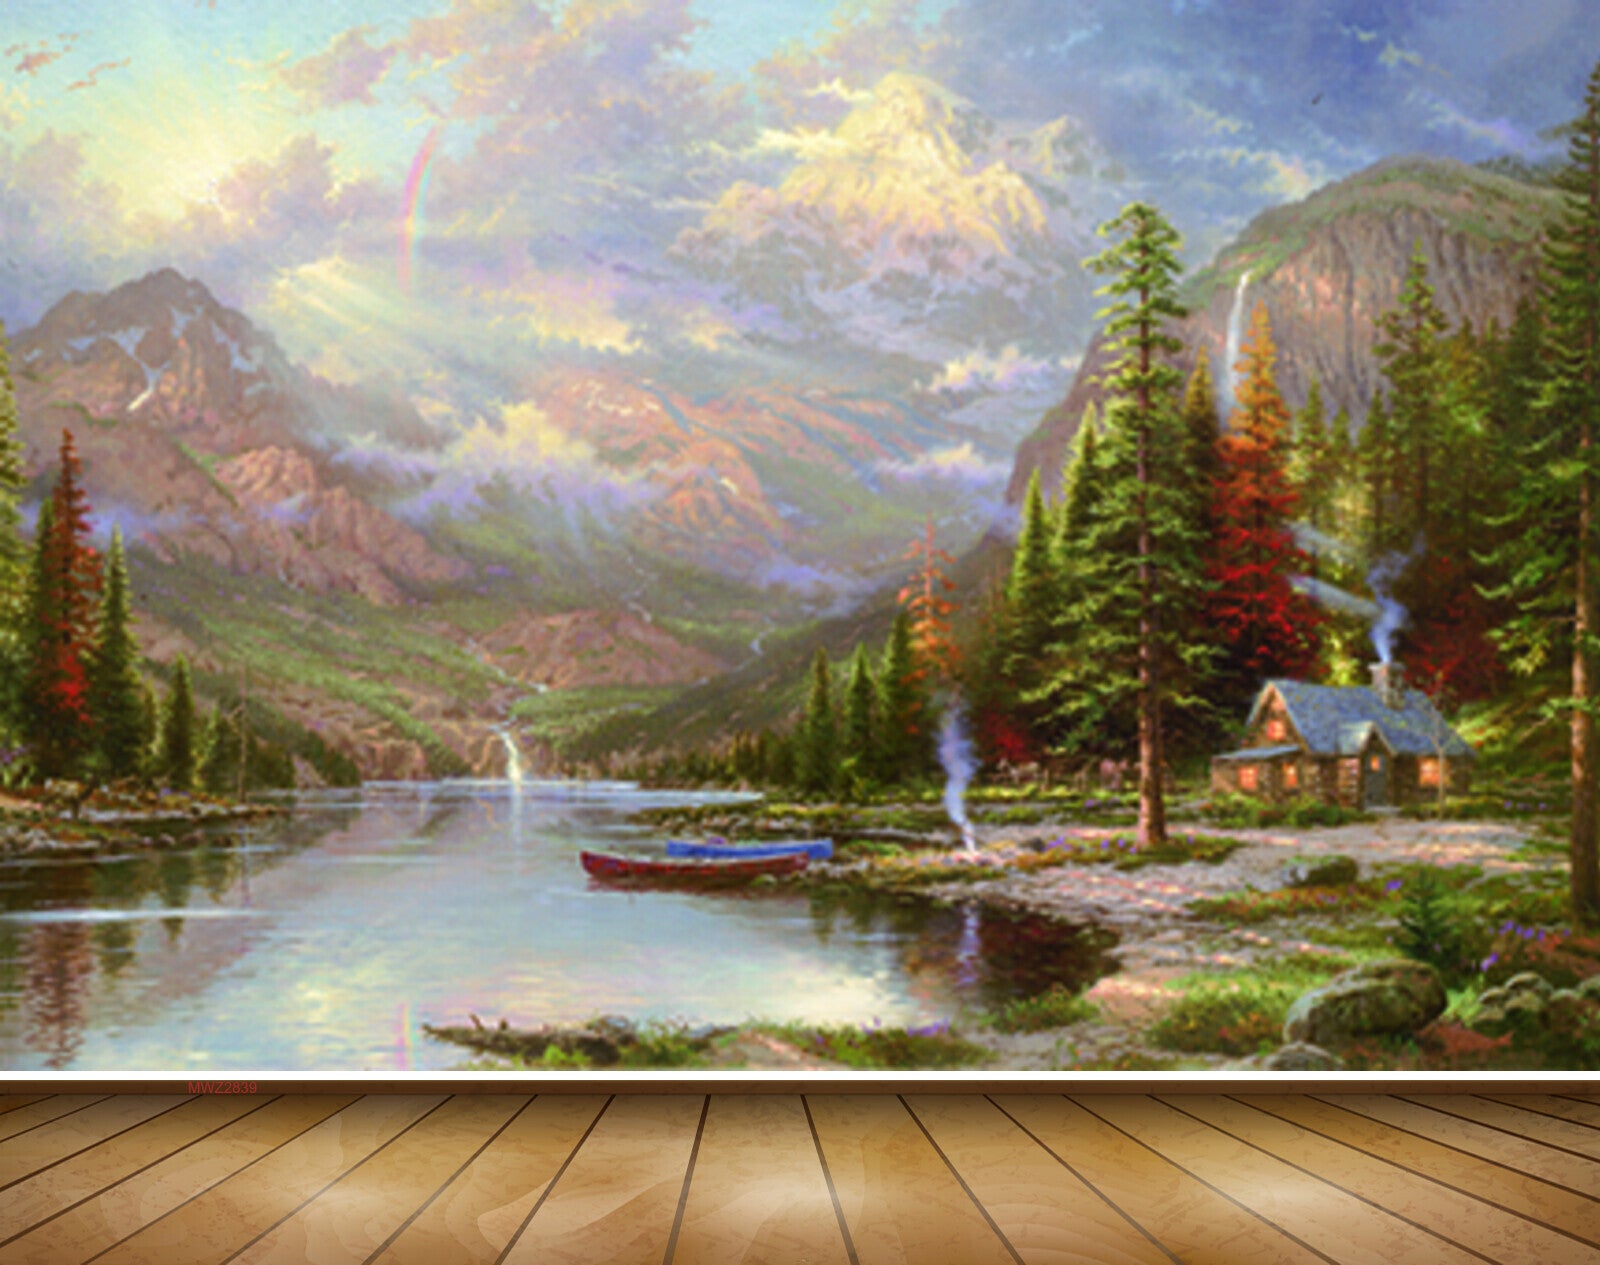 Avikalp MWZ2839 Clouds Trees Lake River Water Boat Mountains Grass Stones House Painting HD Wallpaper